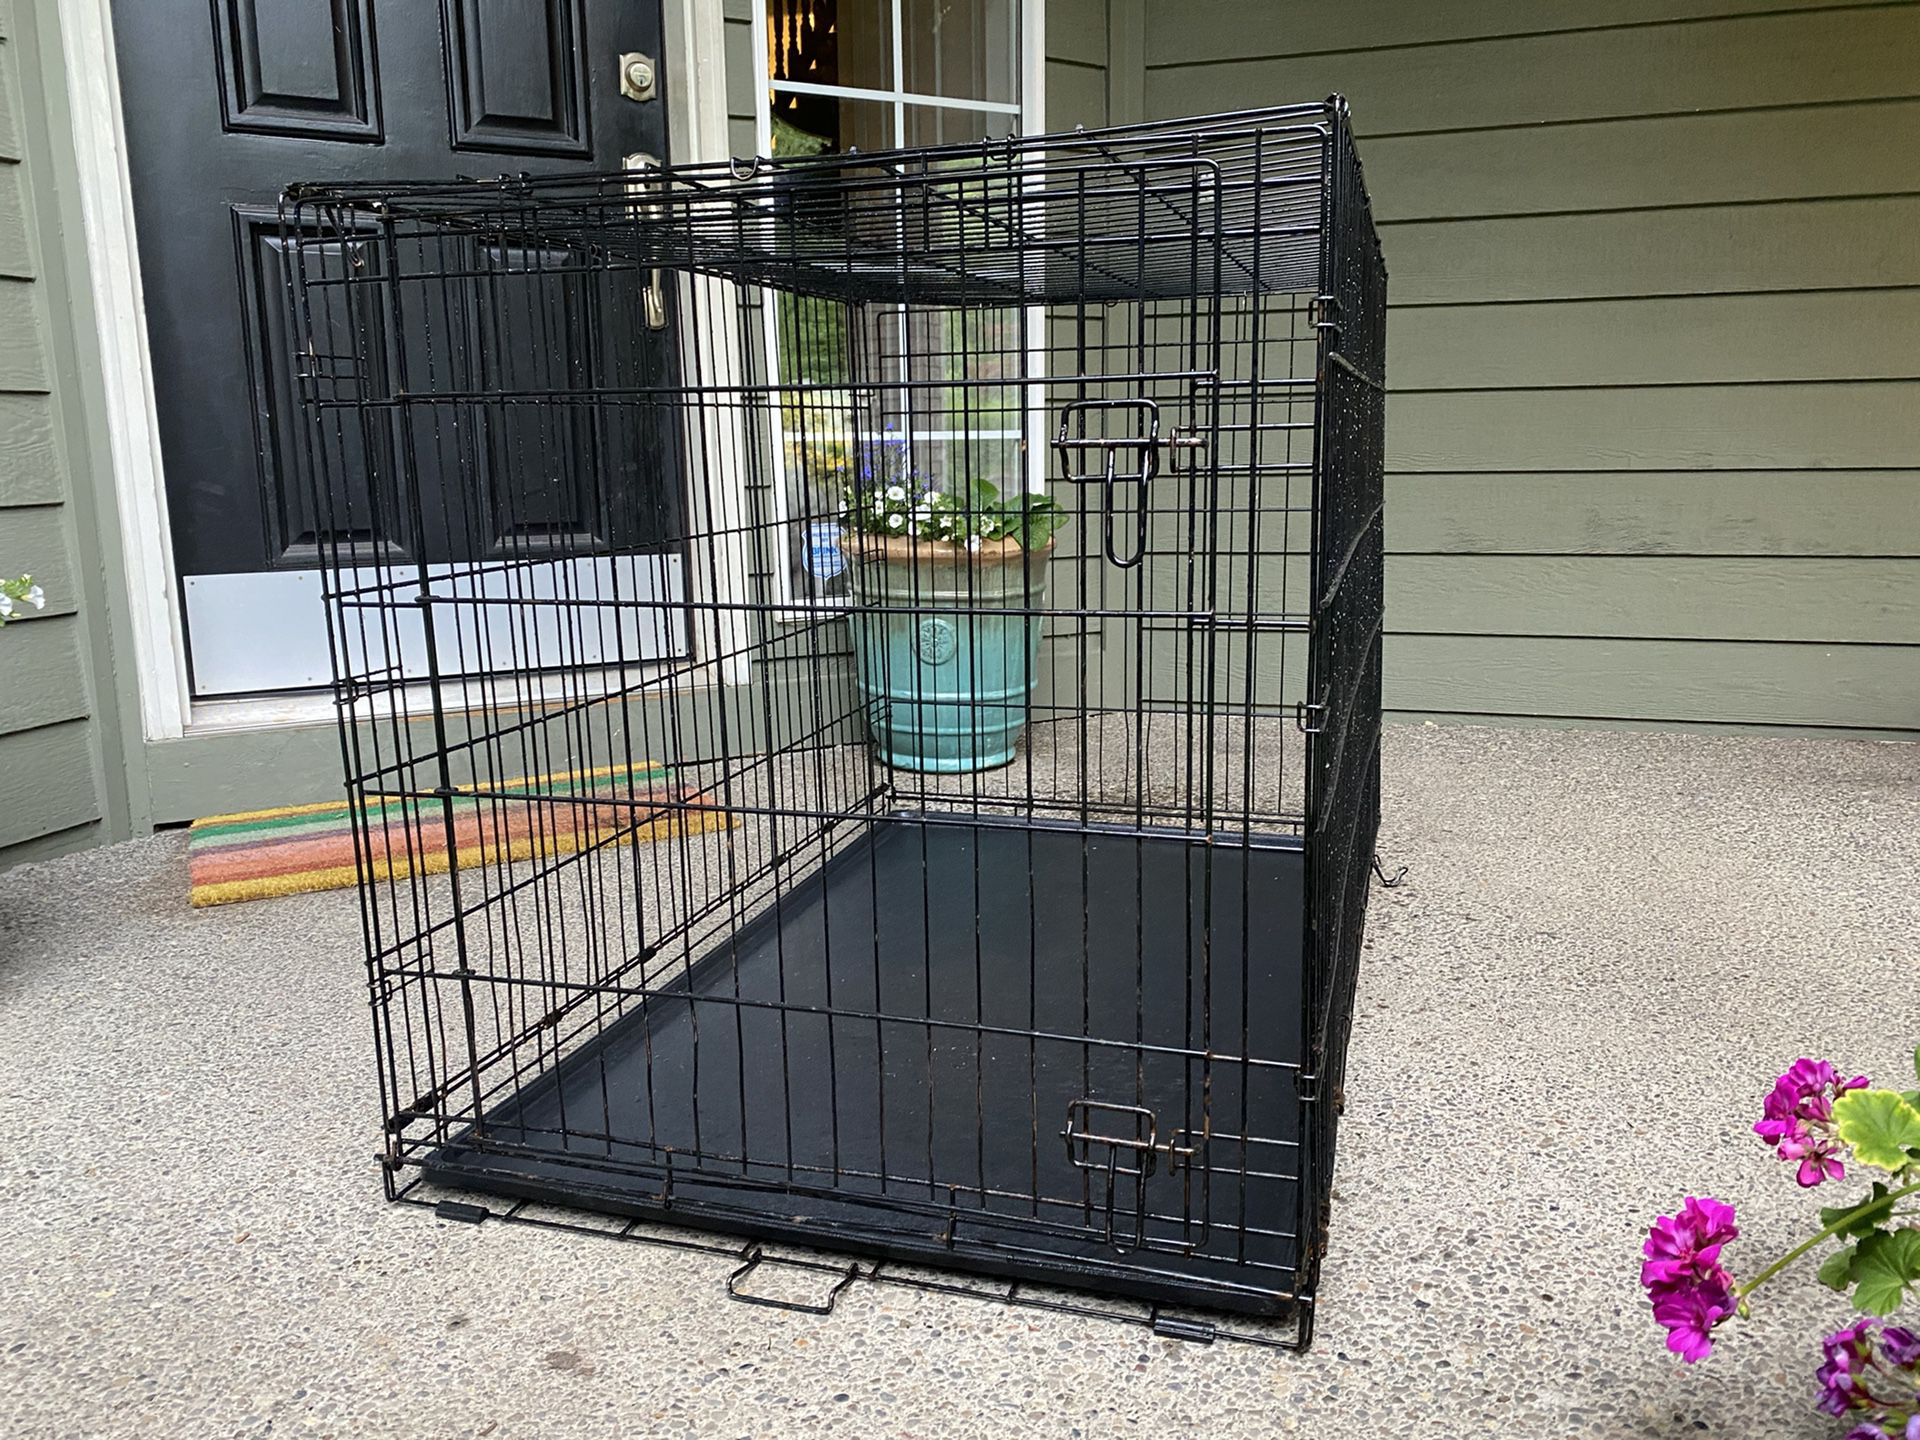 EXTRA LARGE SIZE (48") WIRE DOG KENNEL / CRATE